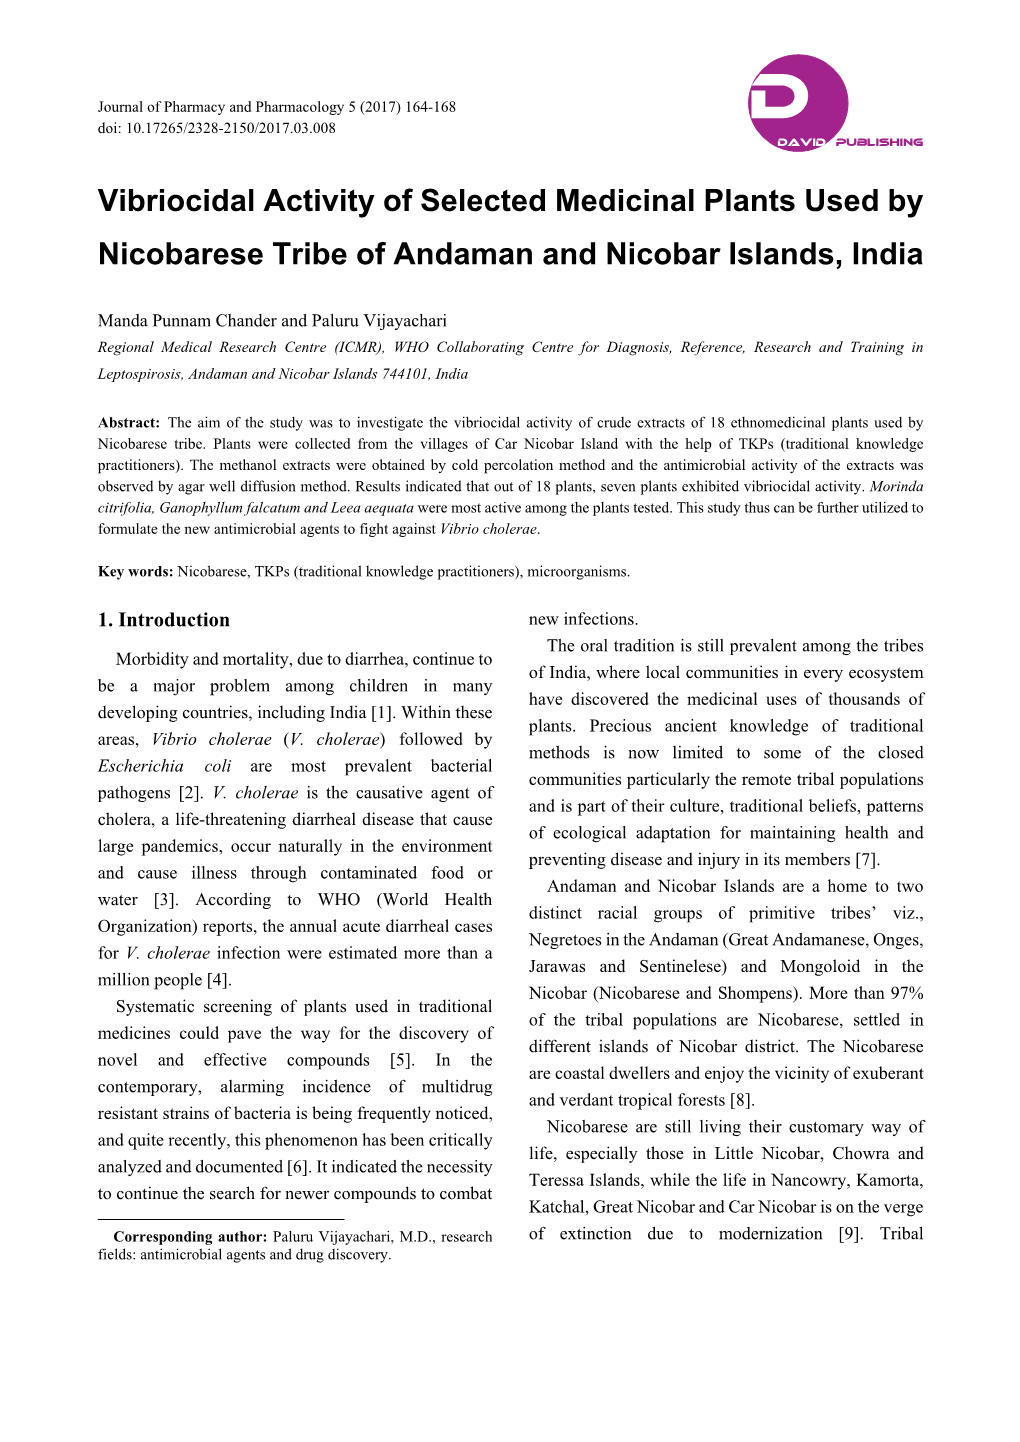 Vibriocidal Activity of Selected Medicinal Plants Used by Nicobarese Tribe of Andaman and Nicobar Islands, India